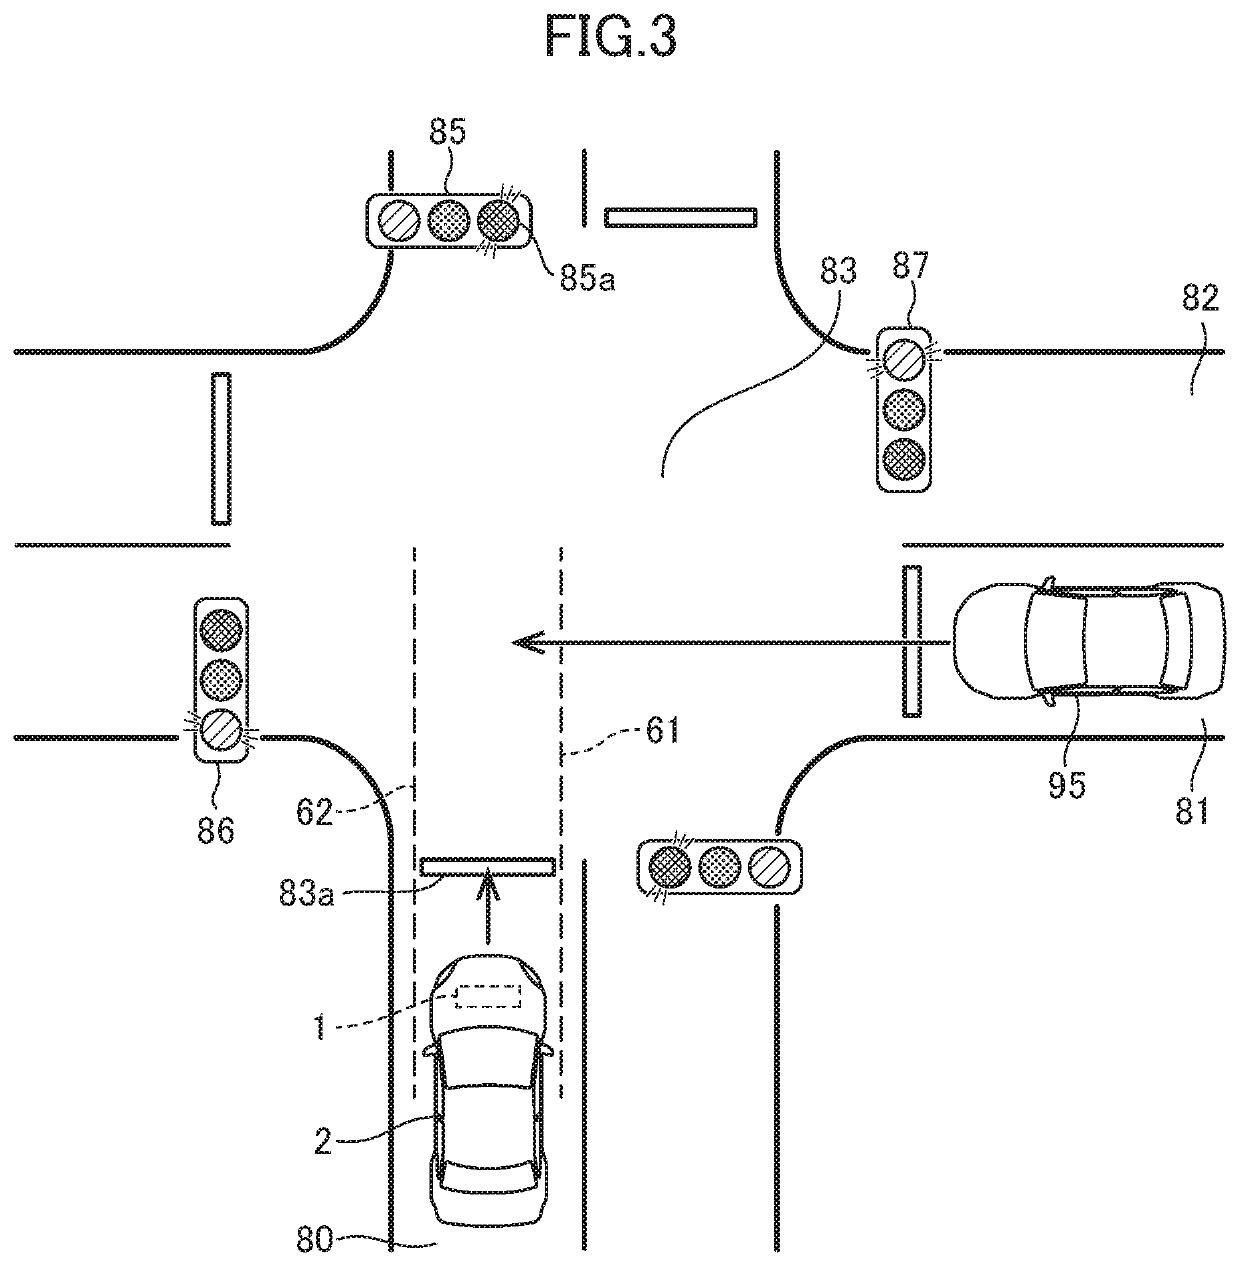 Alarm system for vehicle